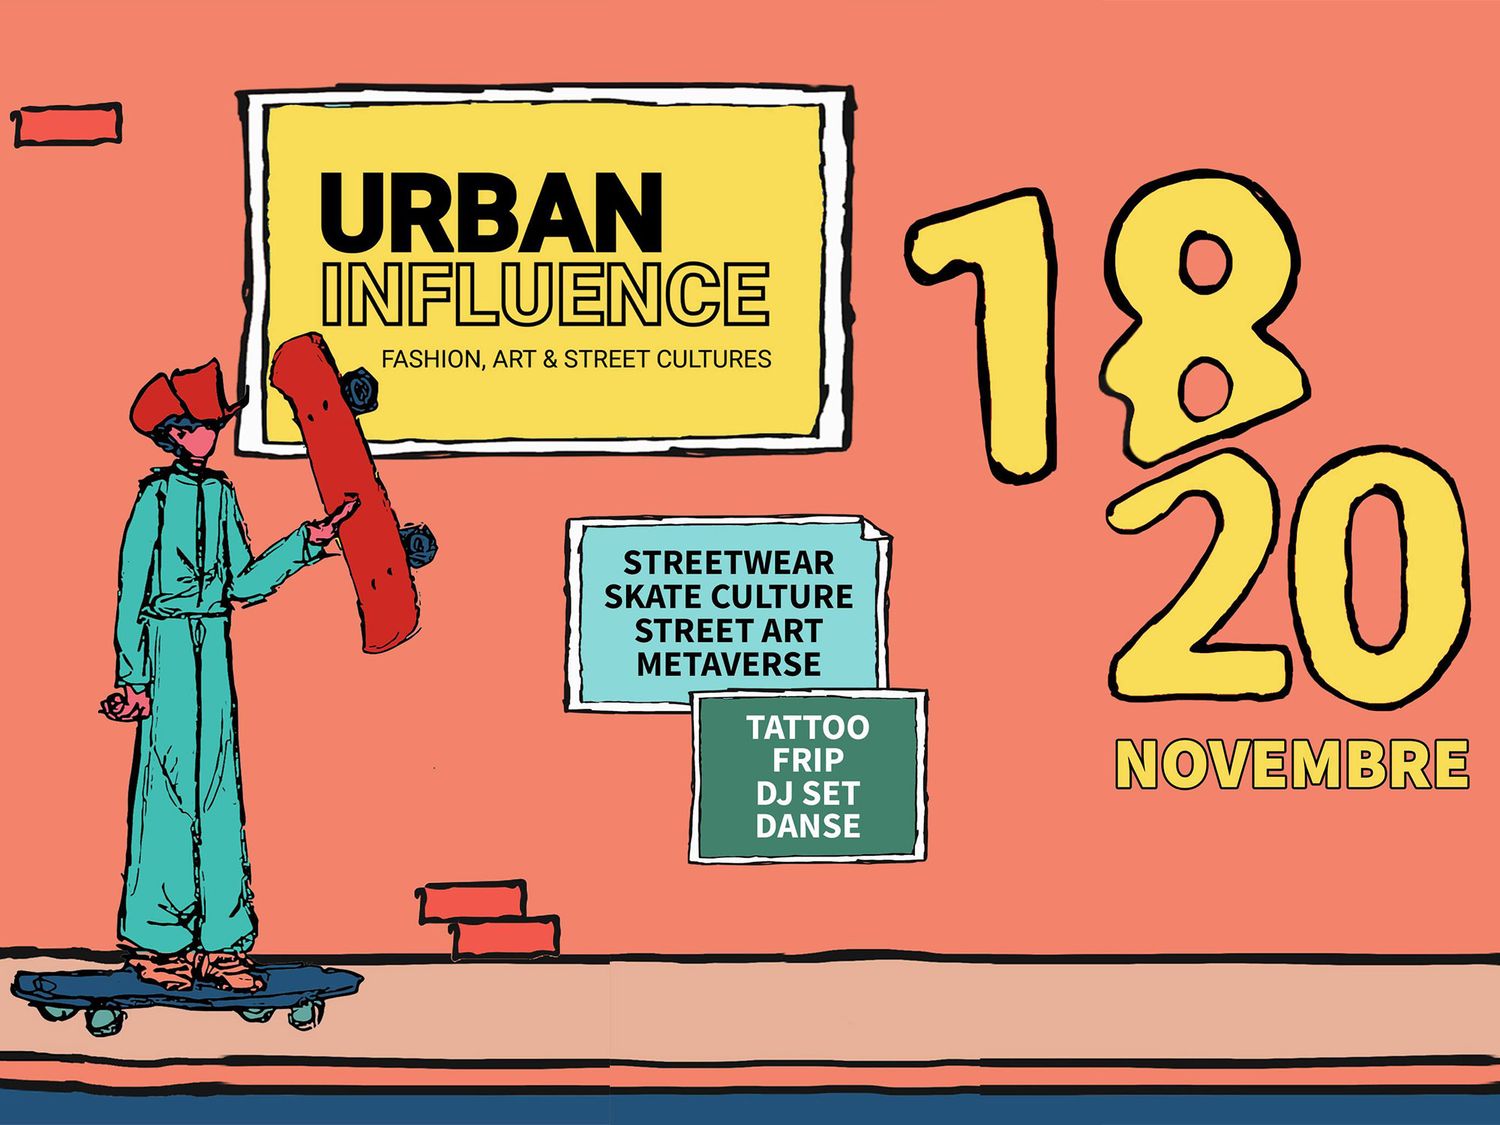 For this very first edition, Urban Influence will propose a program that aims to represent the urban cultures with many surprises during 3 days, from November 18th to 20th in the heart of Paris.